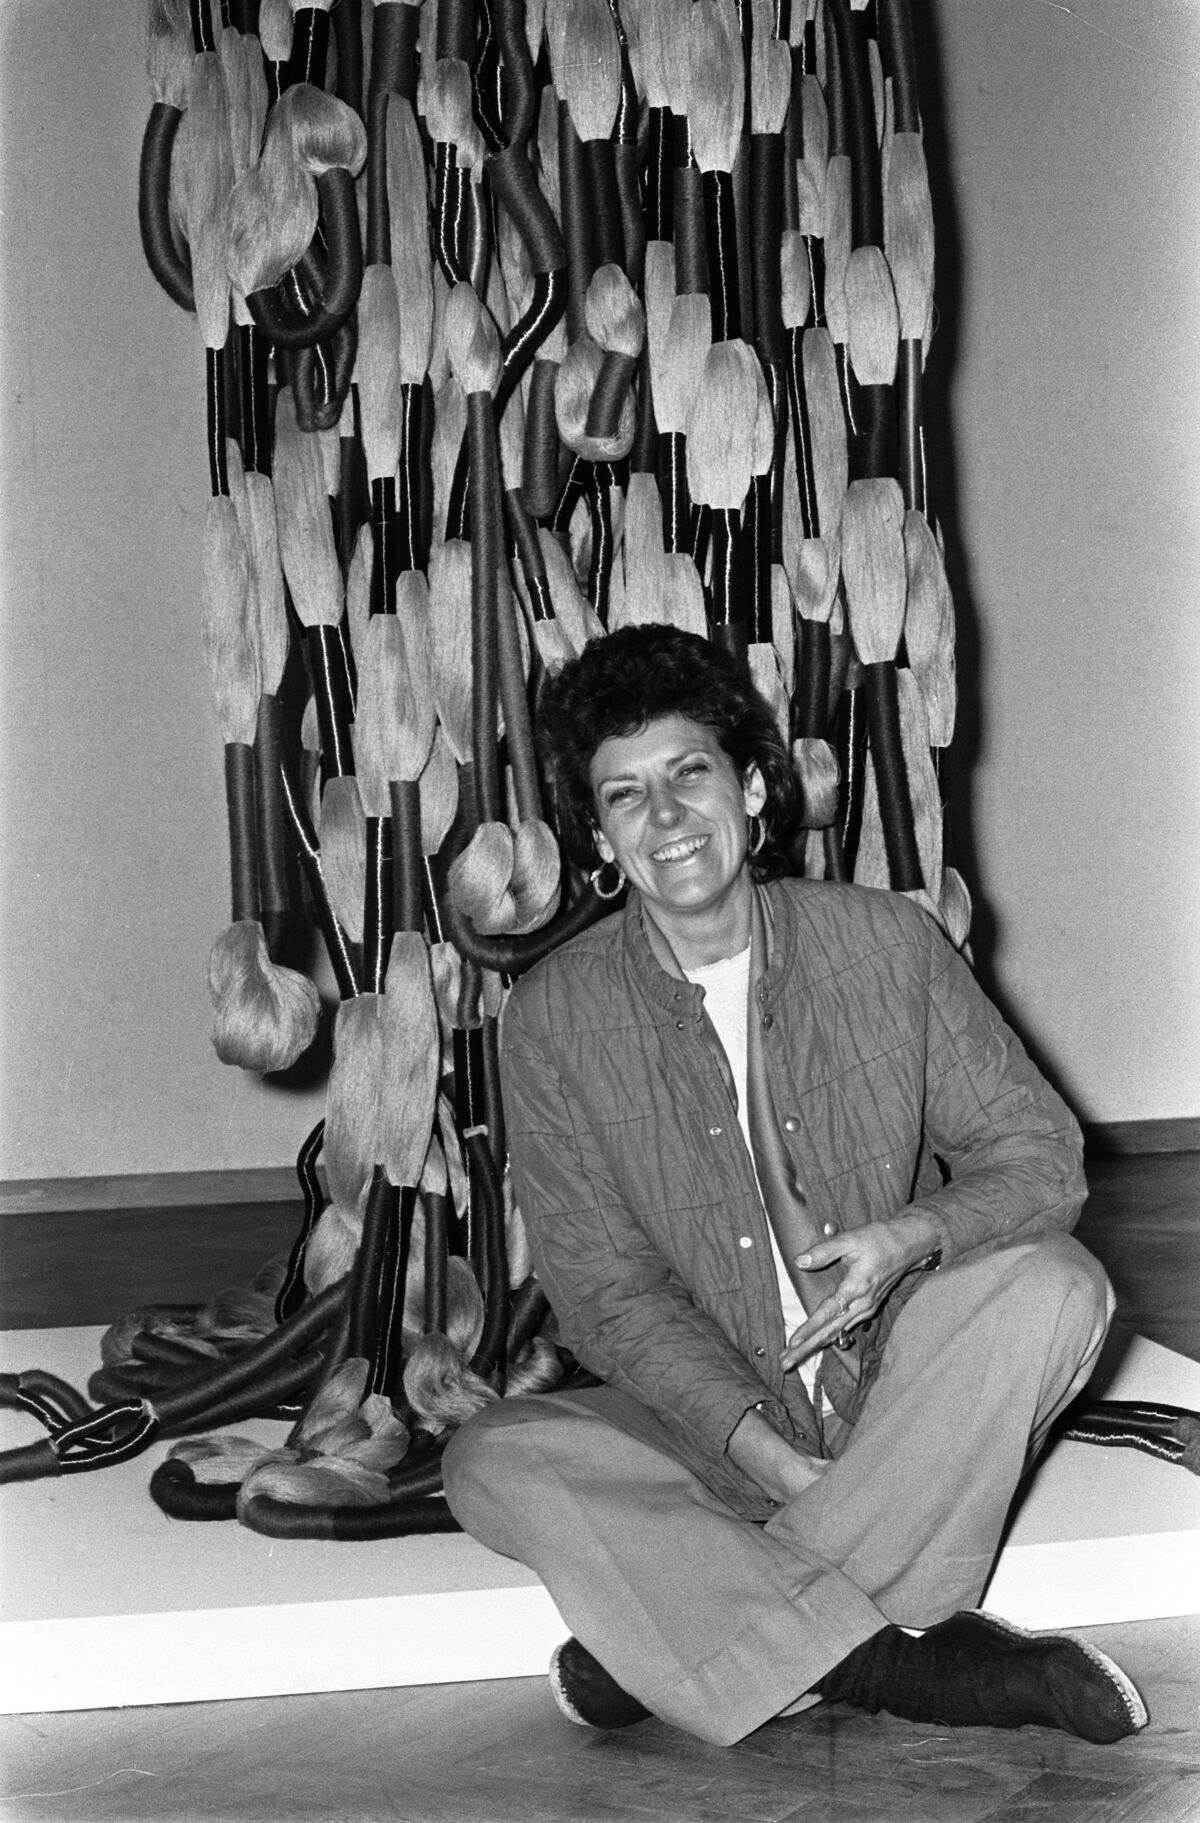 Sheila Hicks organizes an exhibition of tapestries and textile sculptures at the Stedelijk Museum, 1974. Courtesy of the National Archives of the Netherlands.